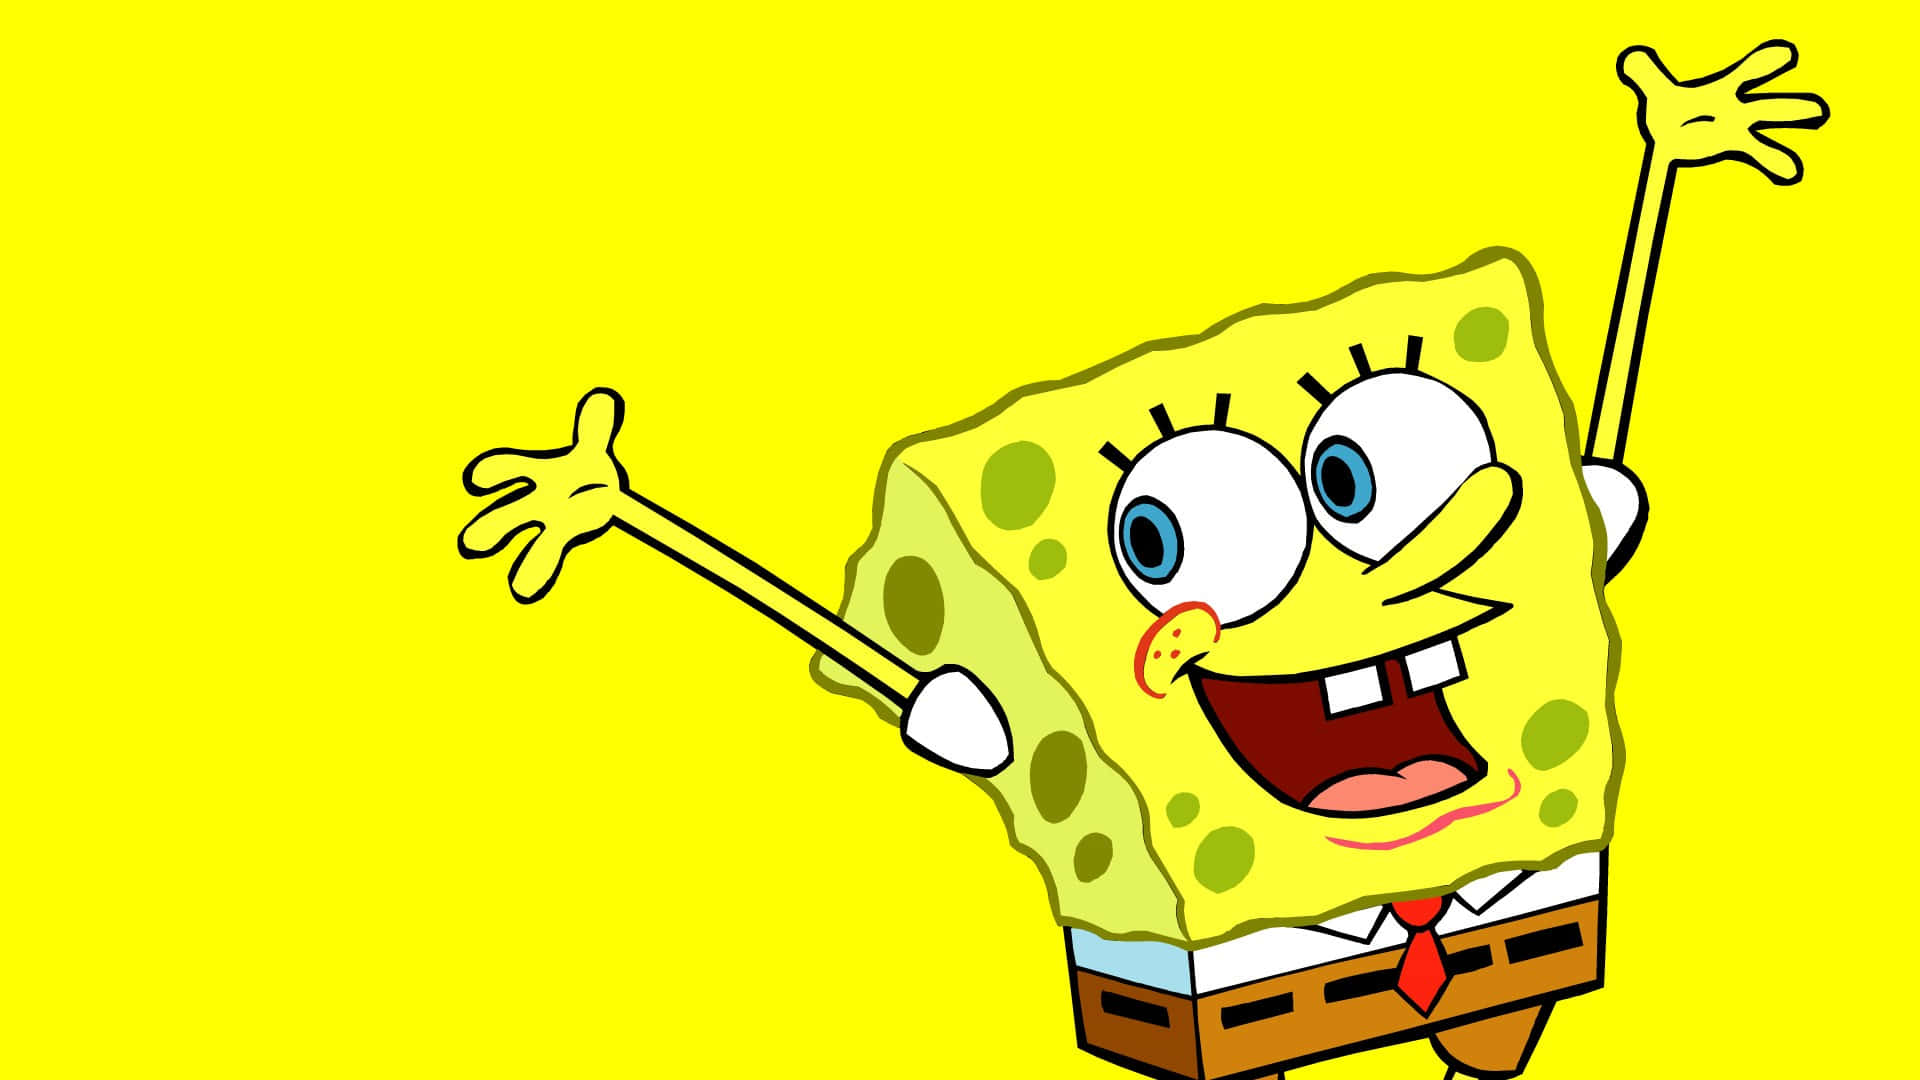 Spongebobpfp, Hurra! (note: Pfp Stands For Profile Picture, Which Might Not Be Commonly Used In Sweden. 